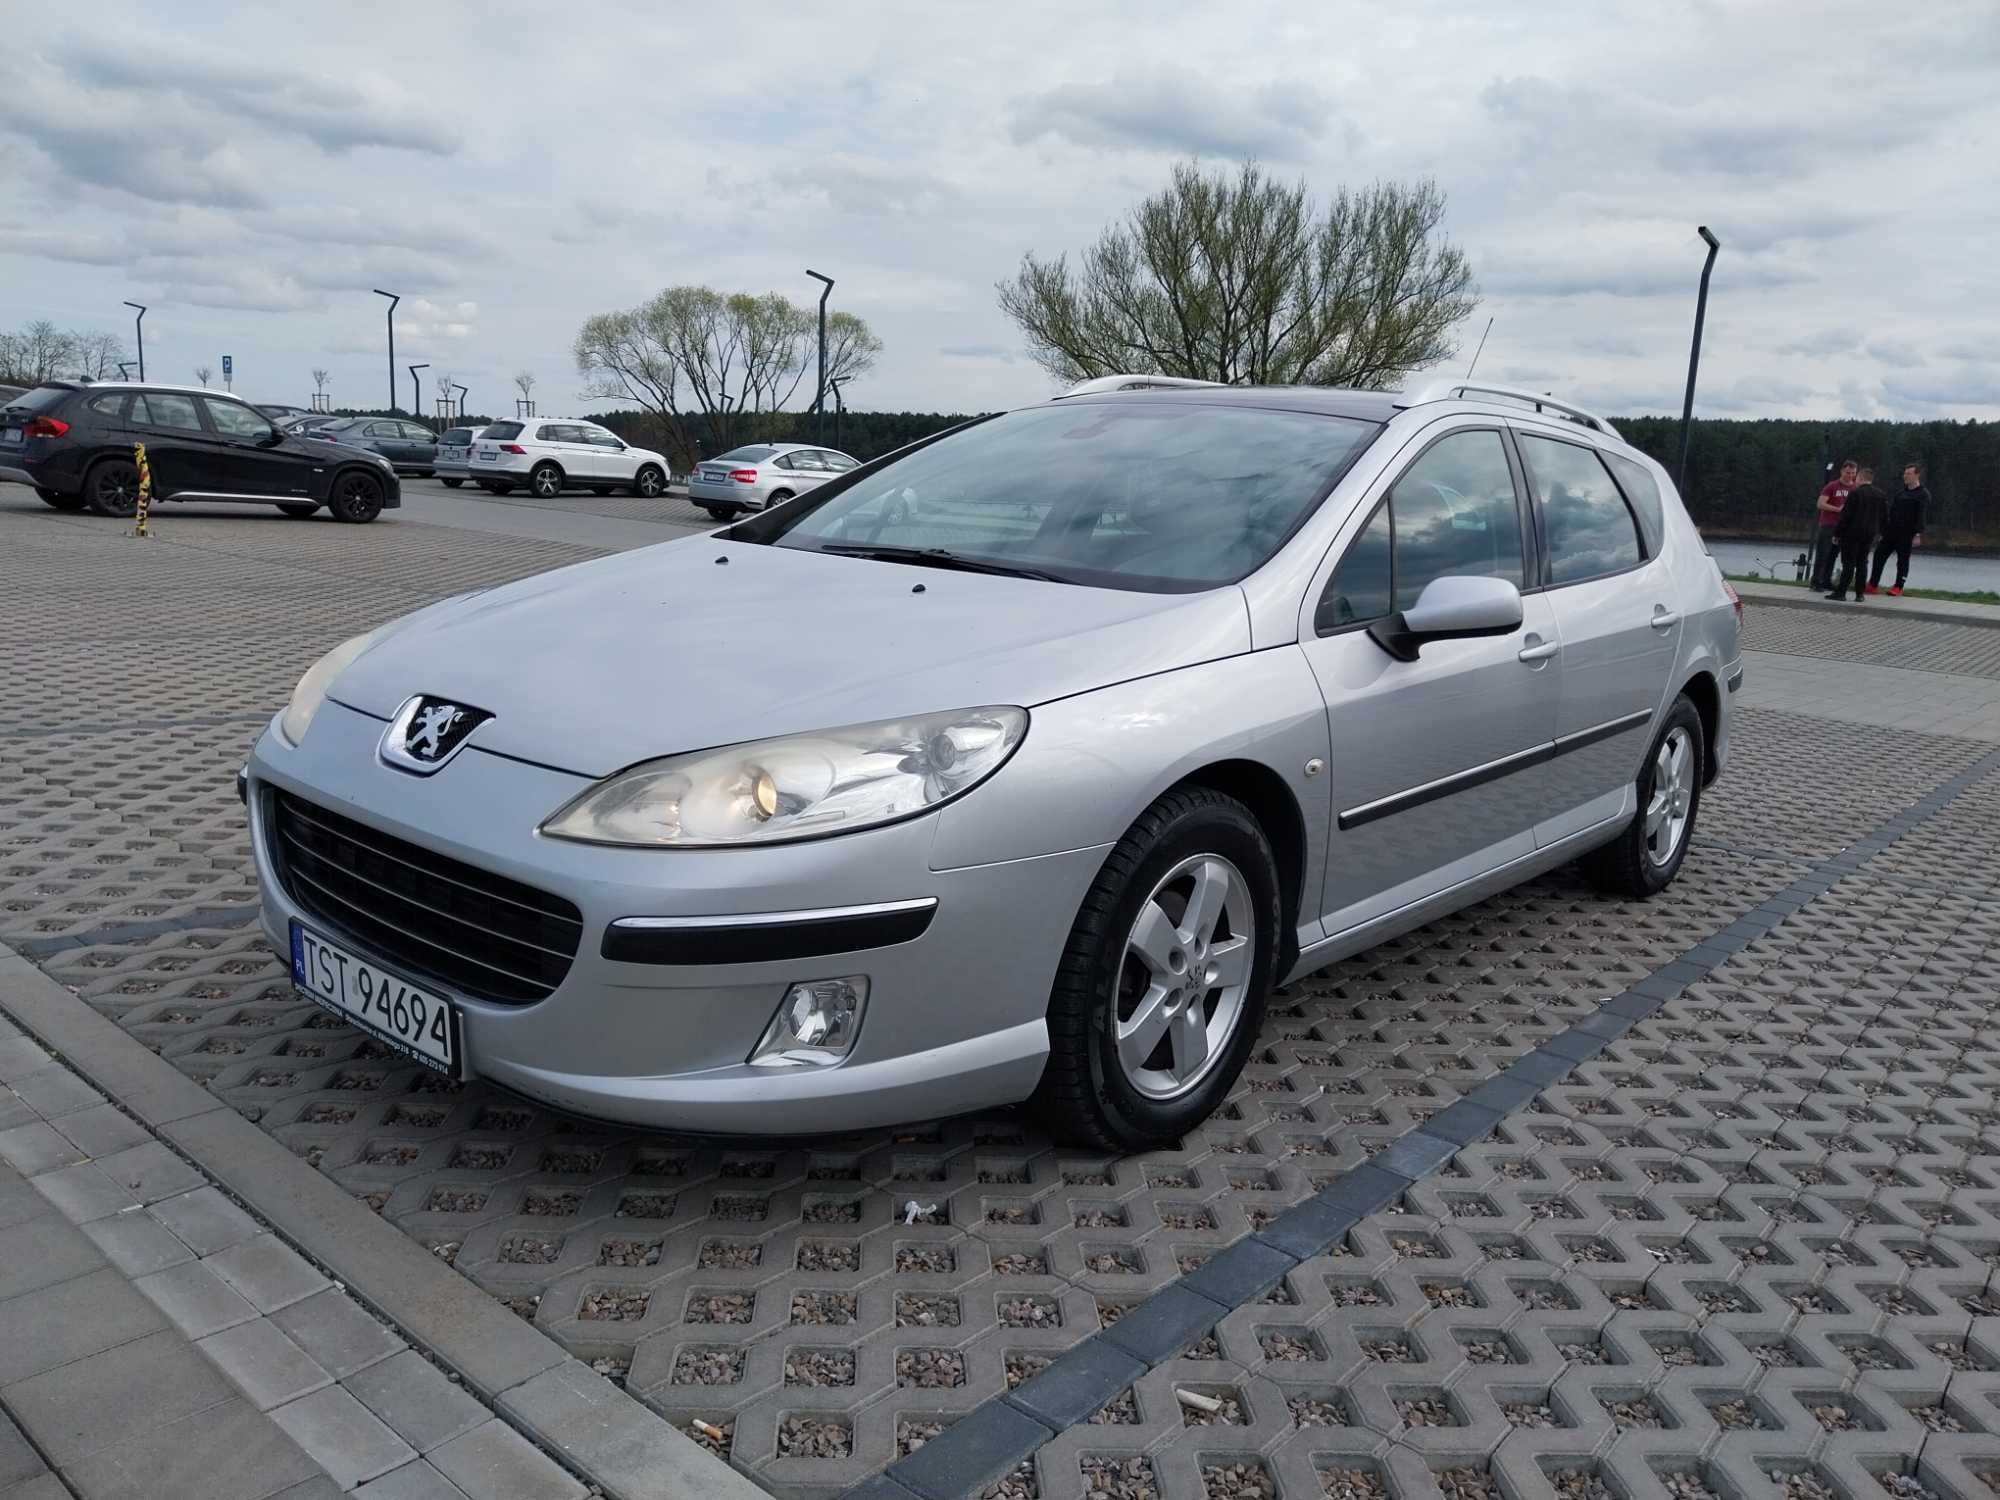 Peugeot 407 SW 2.0 HDI Kombi Panoramiczny dach 2007r